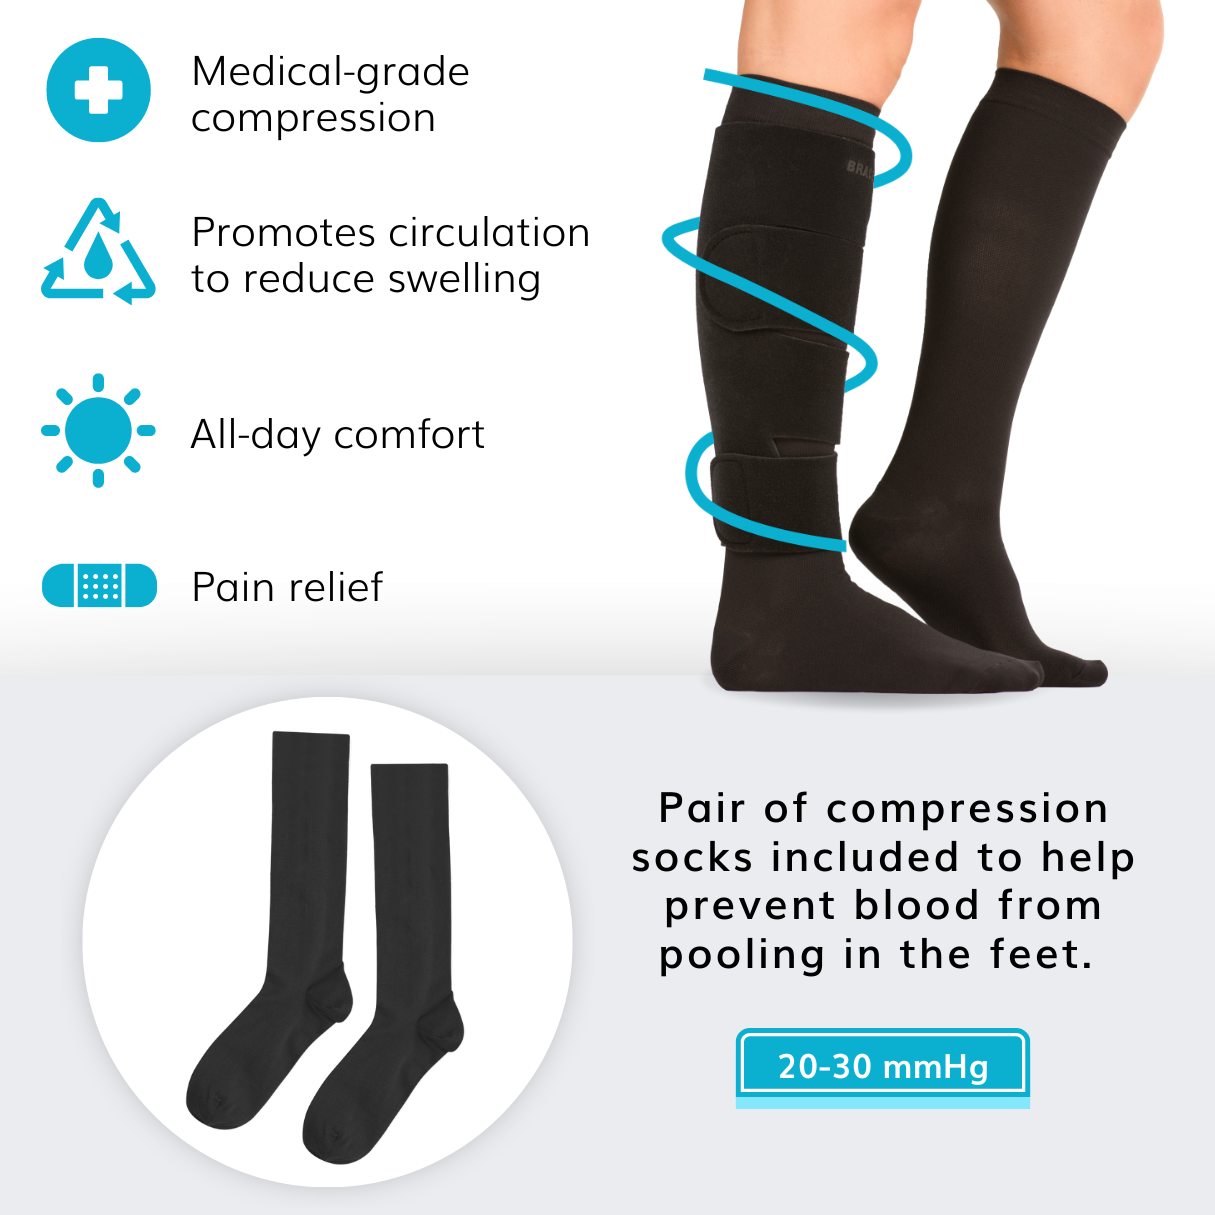 Compression Garments Can Ease Lymphedema. Covering Costs? Not So